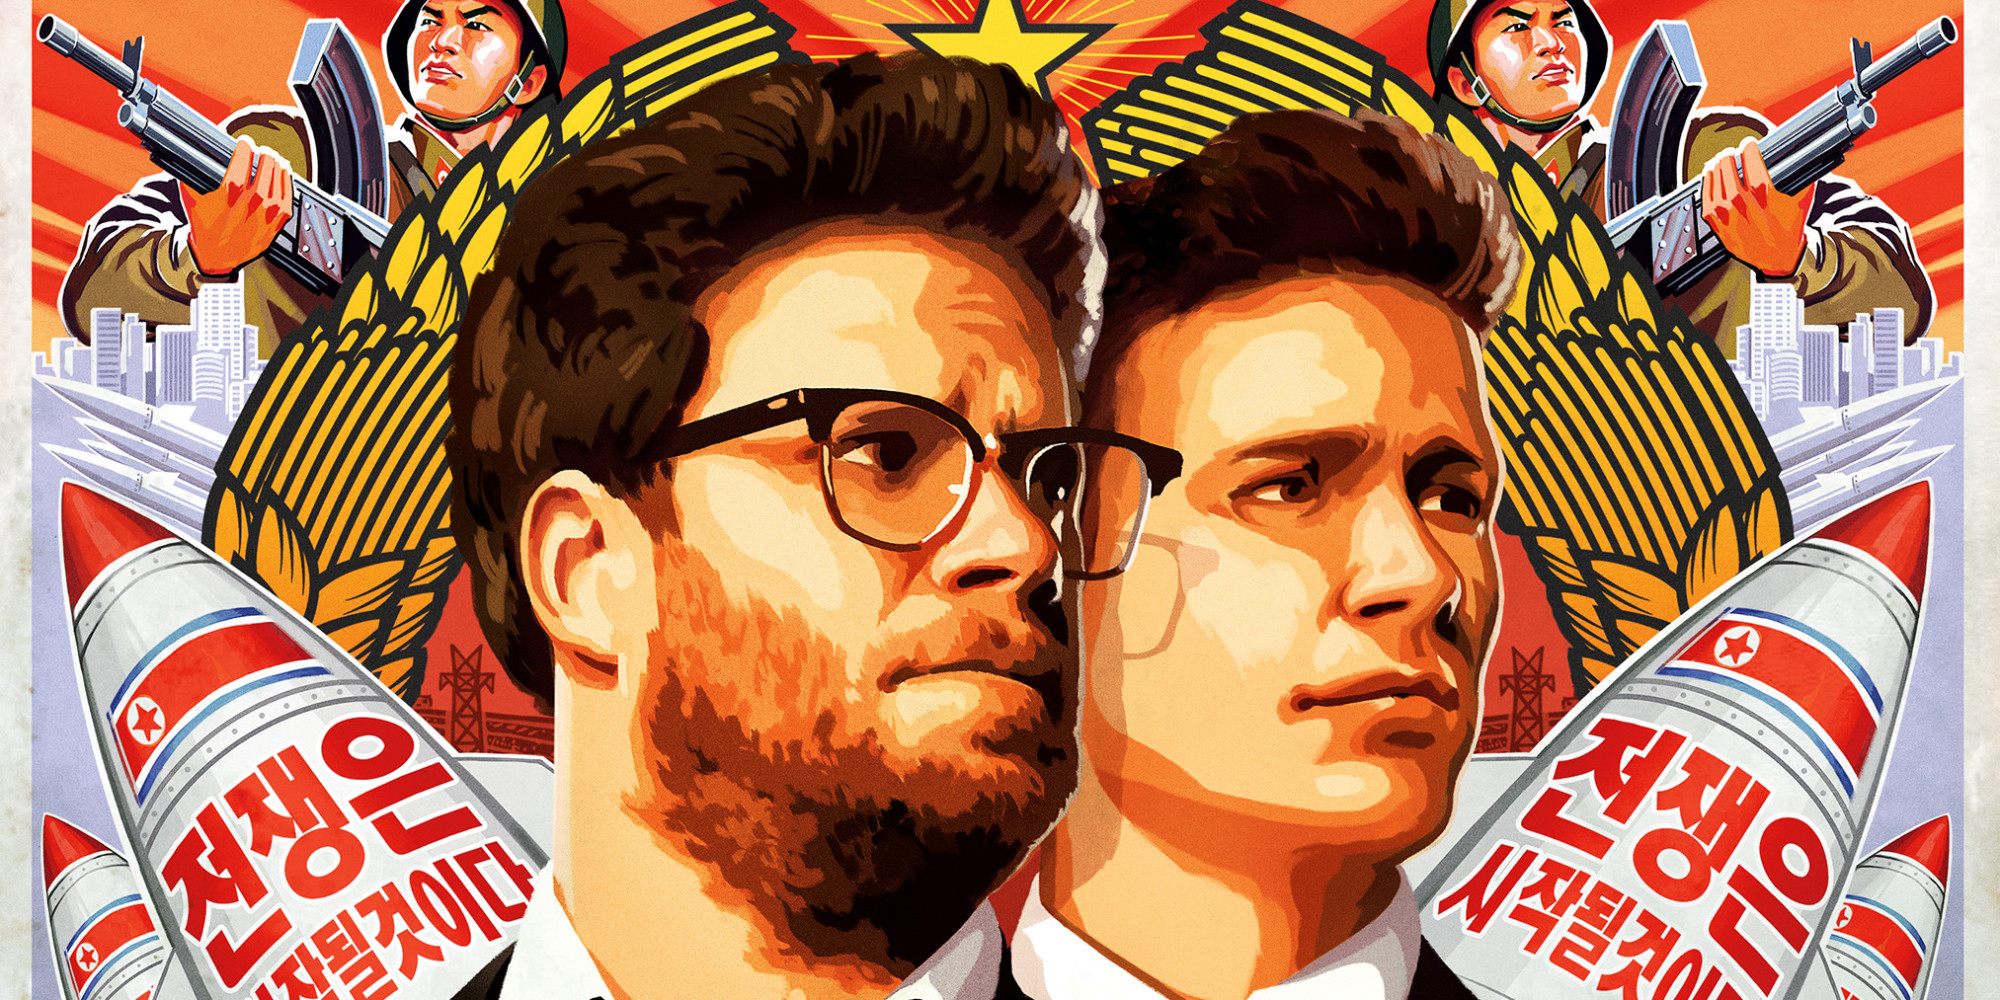 how to watch the interview online